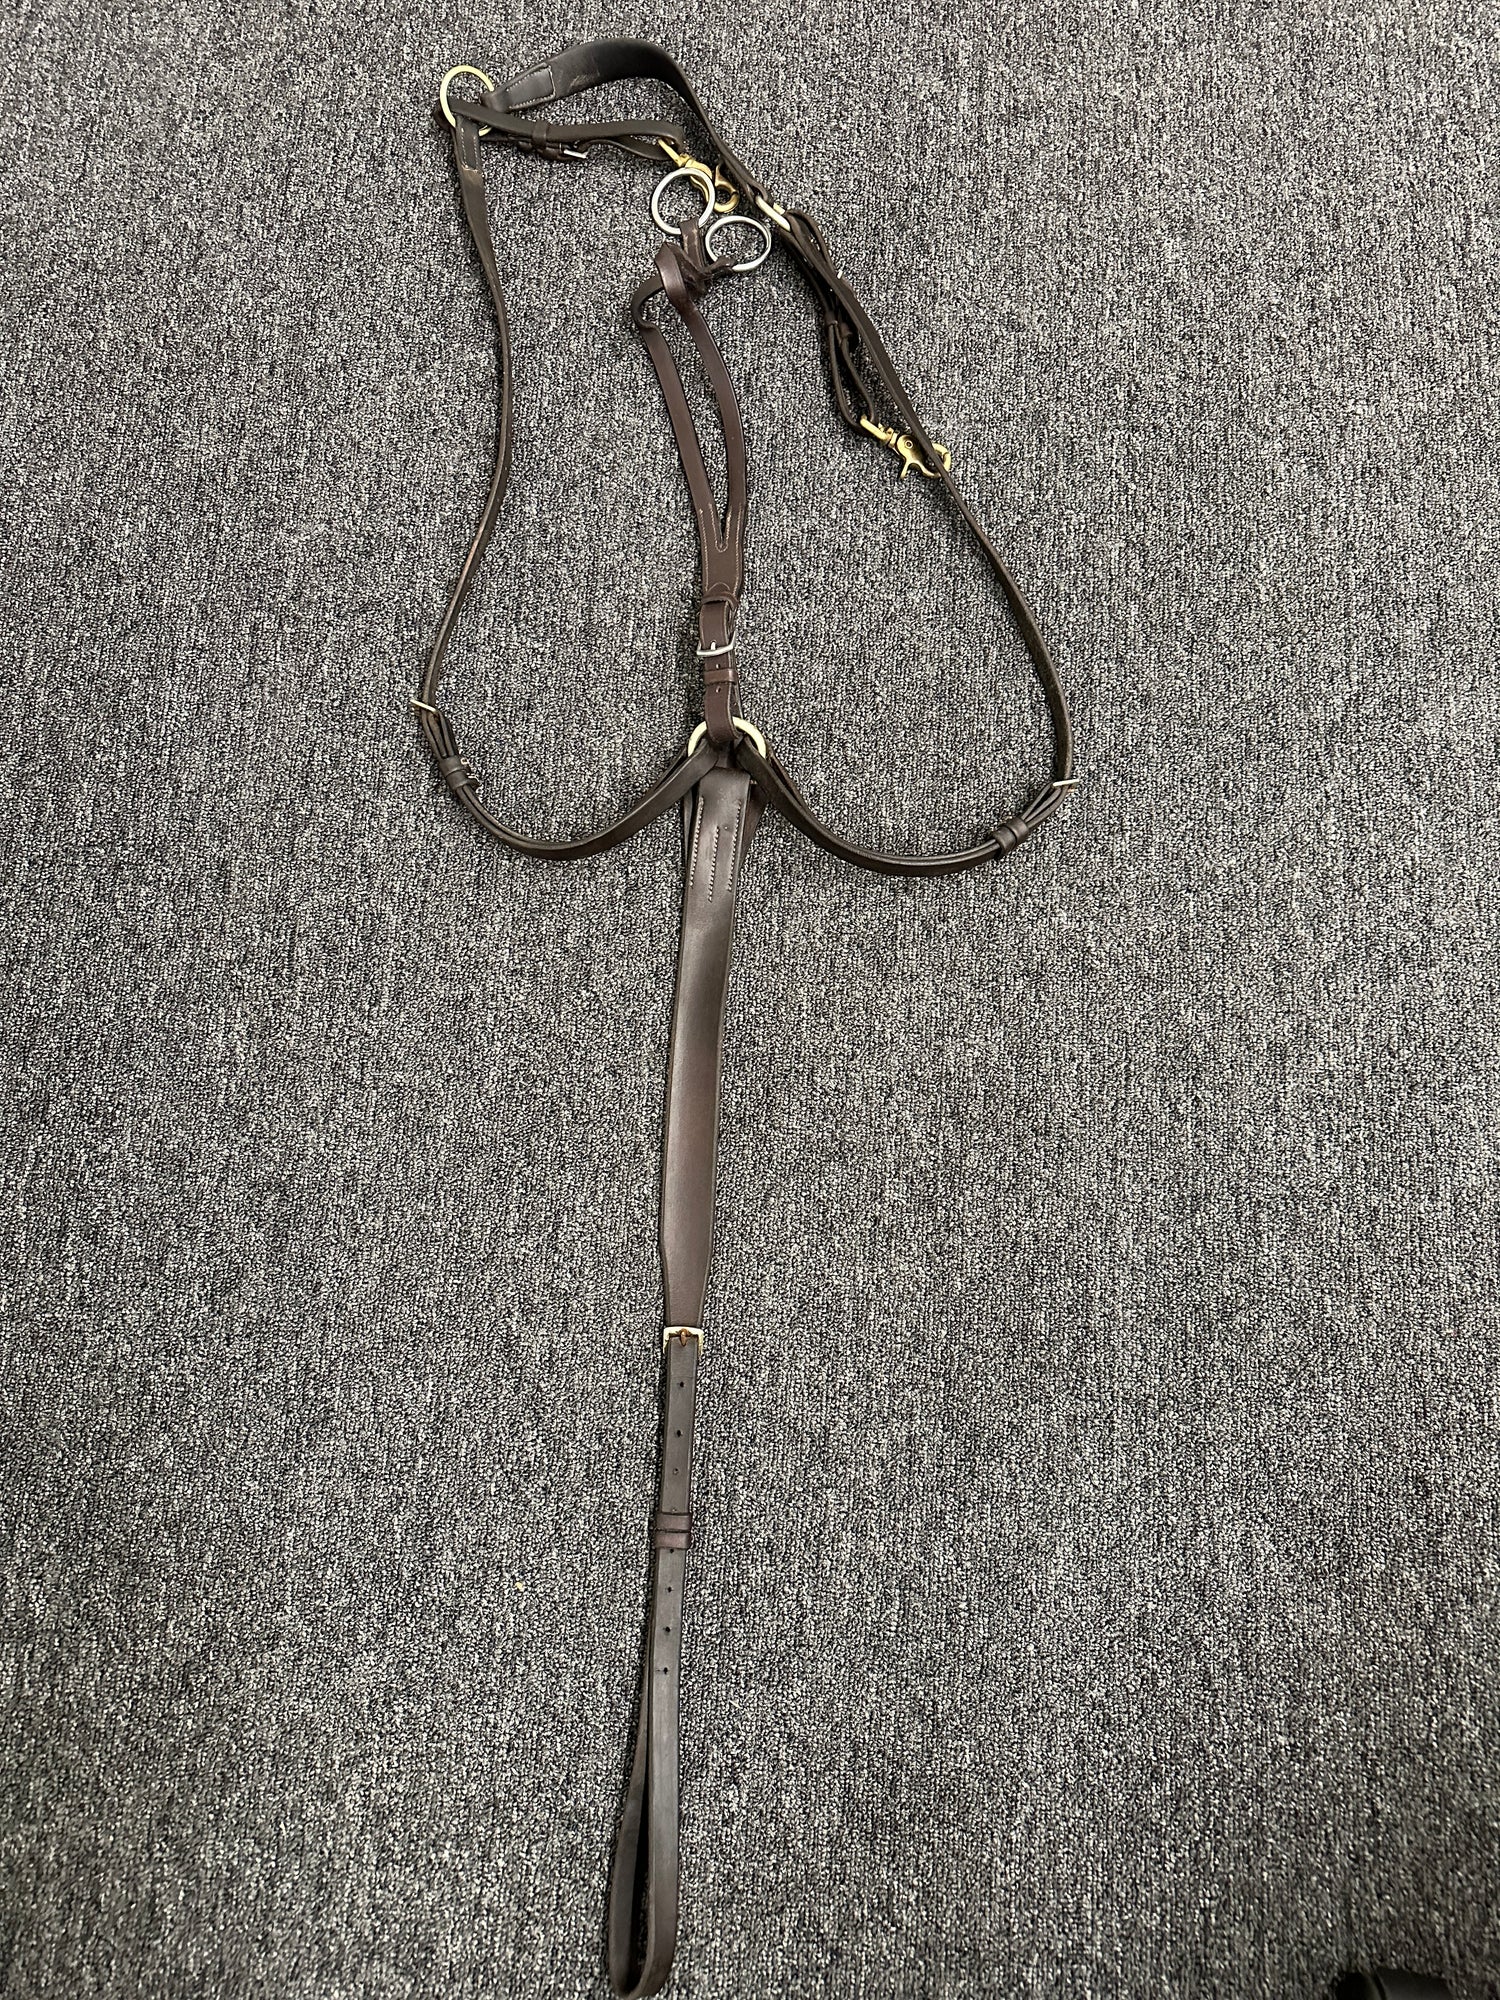 Breast Plate - English style Horse Size with Running Martingale attachment